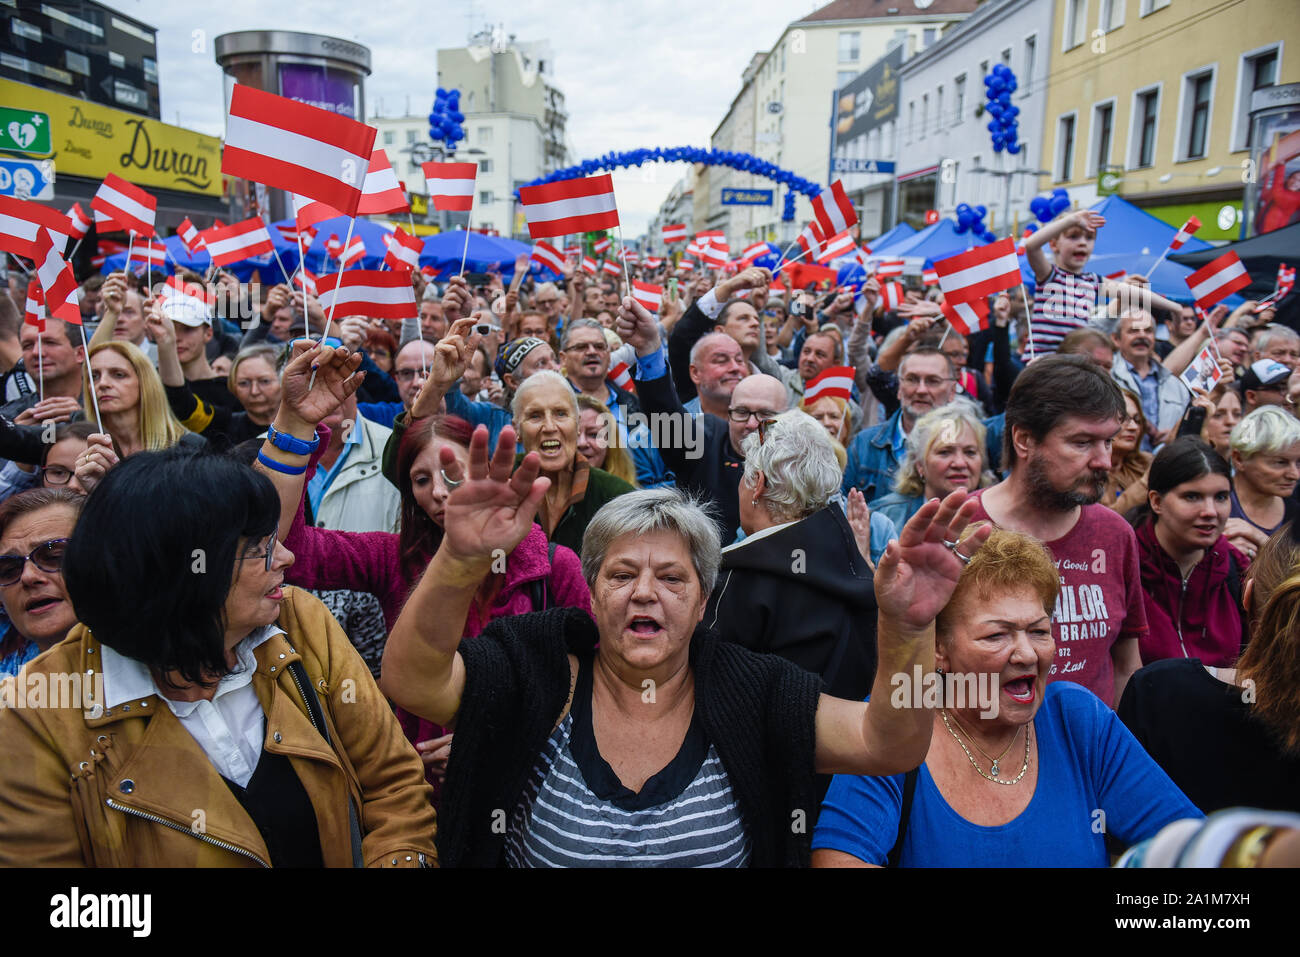 Supporters with Austrian flags applauding Norbert Hofer who is speaking, during a campaign event ahead of Sunday's snap parliamentary elections.On September 29, 2019 parliamentary elections will take place as a result of a hidden-camera footage where OeVP's coalition partner, the far-right Freedom Party (FPOe) was caught up in a corruption scandal and brought the government down. Stock Photo